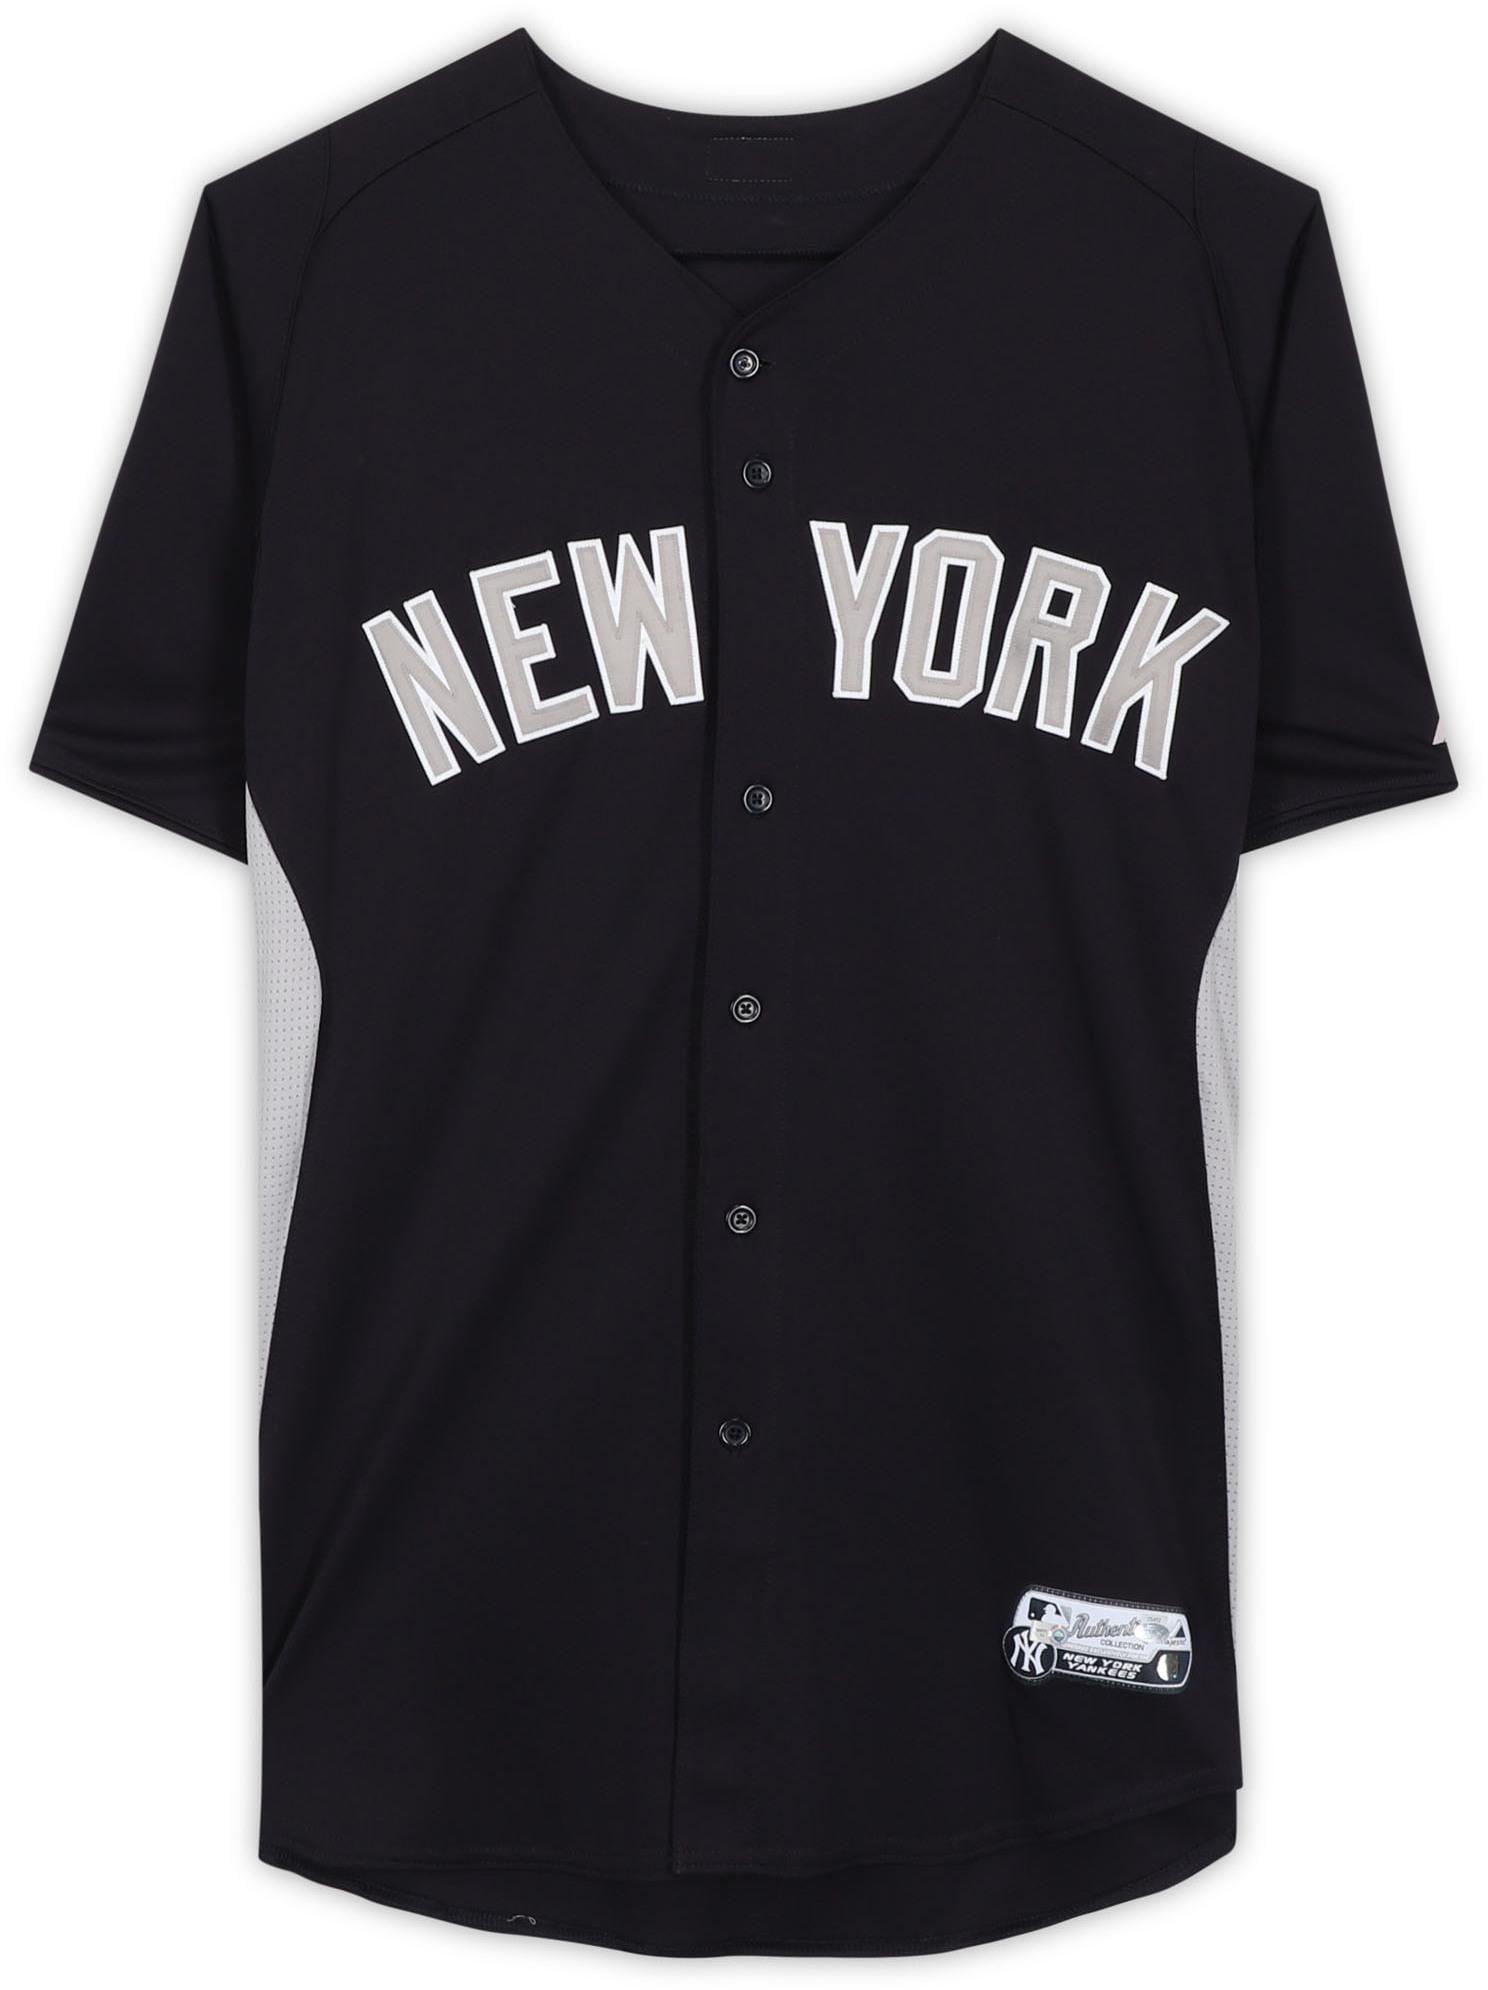 New York Yankees Team-Issued #71 Navy Jersey from the 2011 MLB Season ...